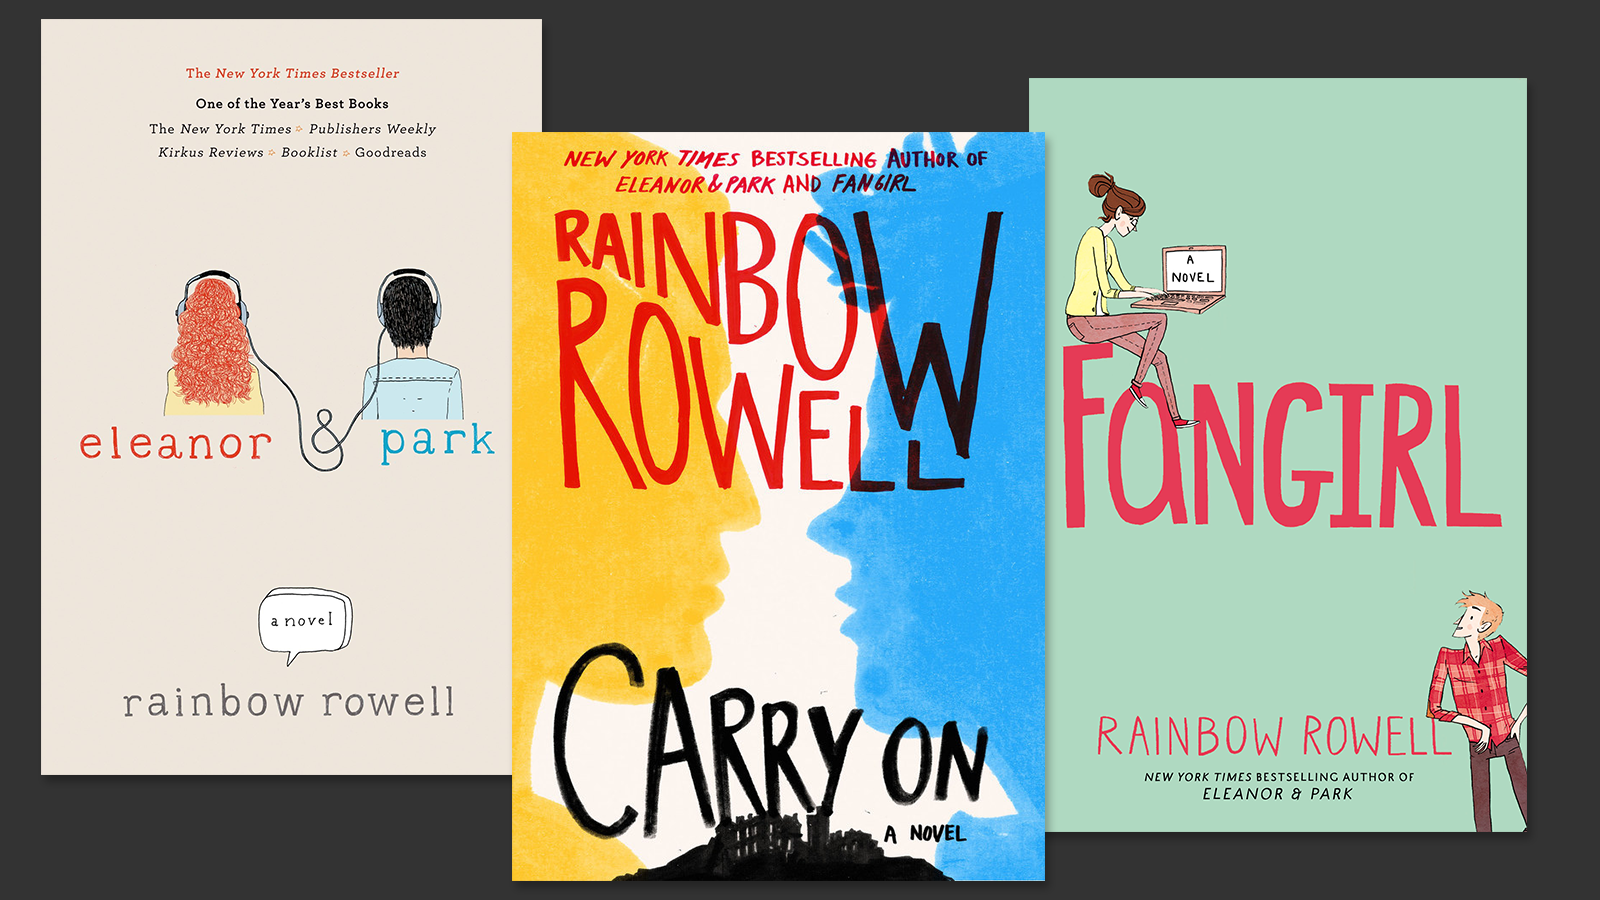 Covers of Rainbow Rowell's novels ELEANOR & PARK, CARRY ON, and FANGIRL; links to news story